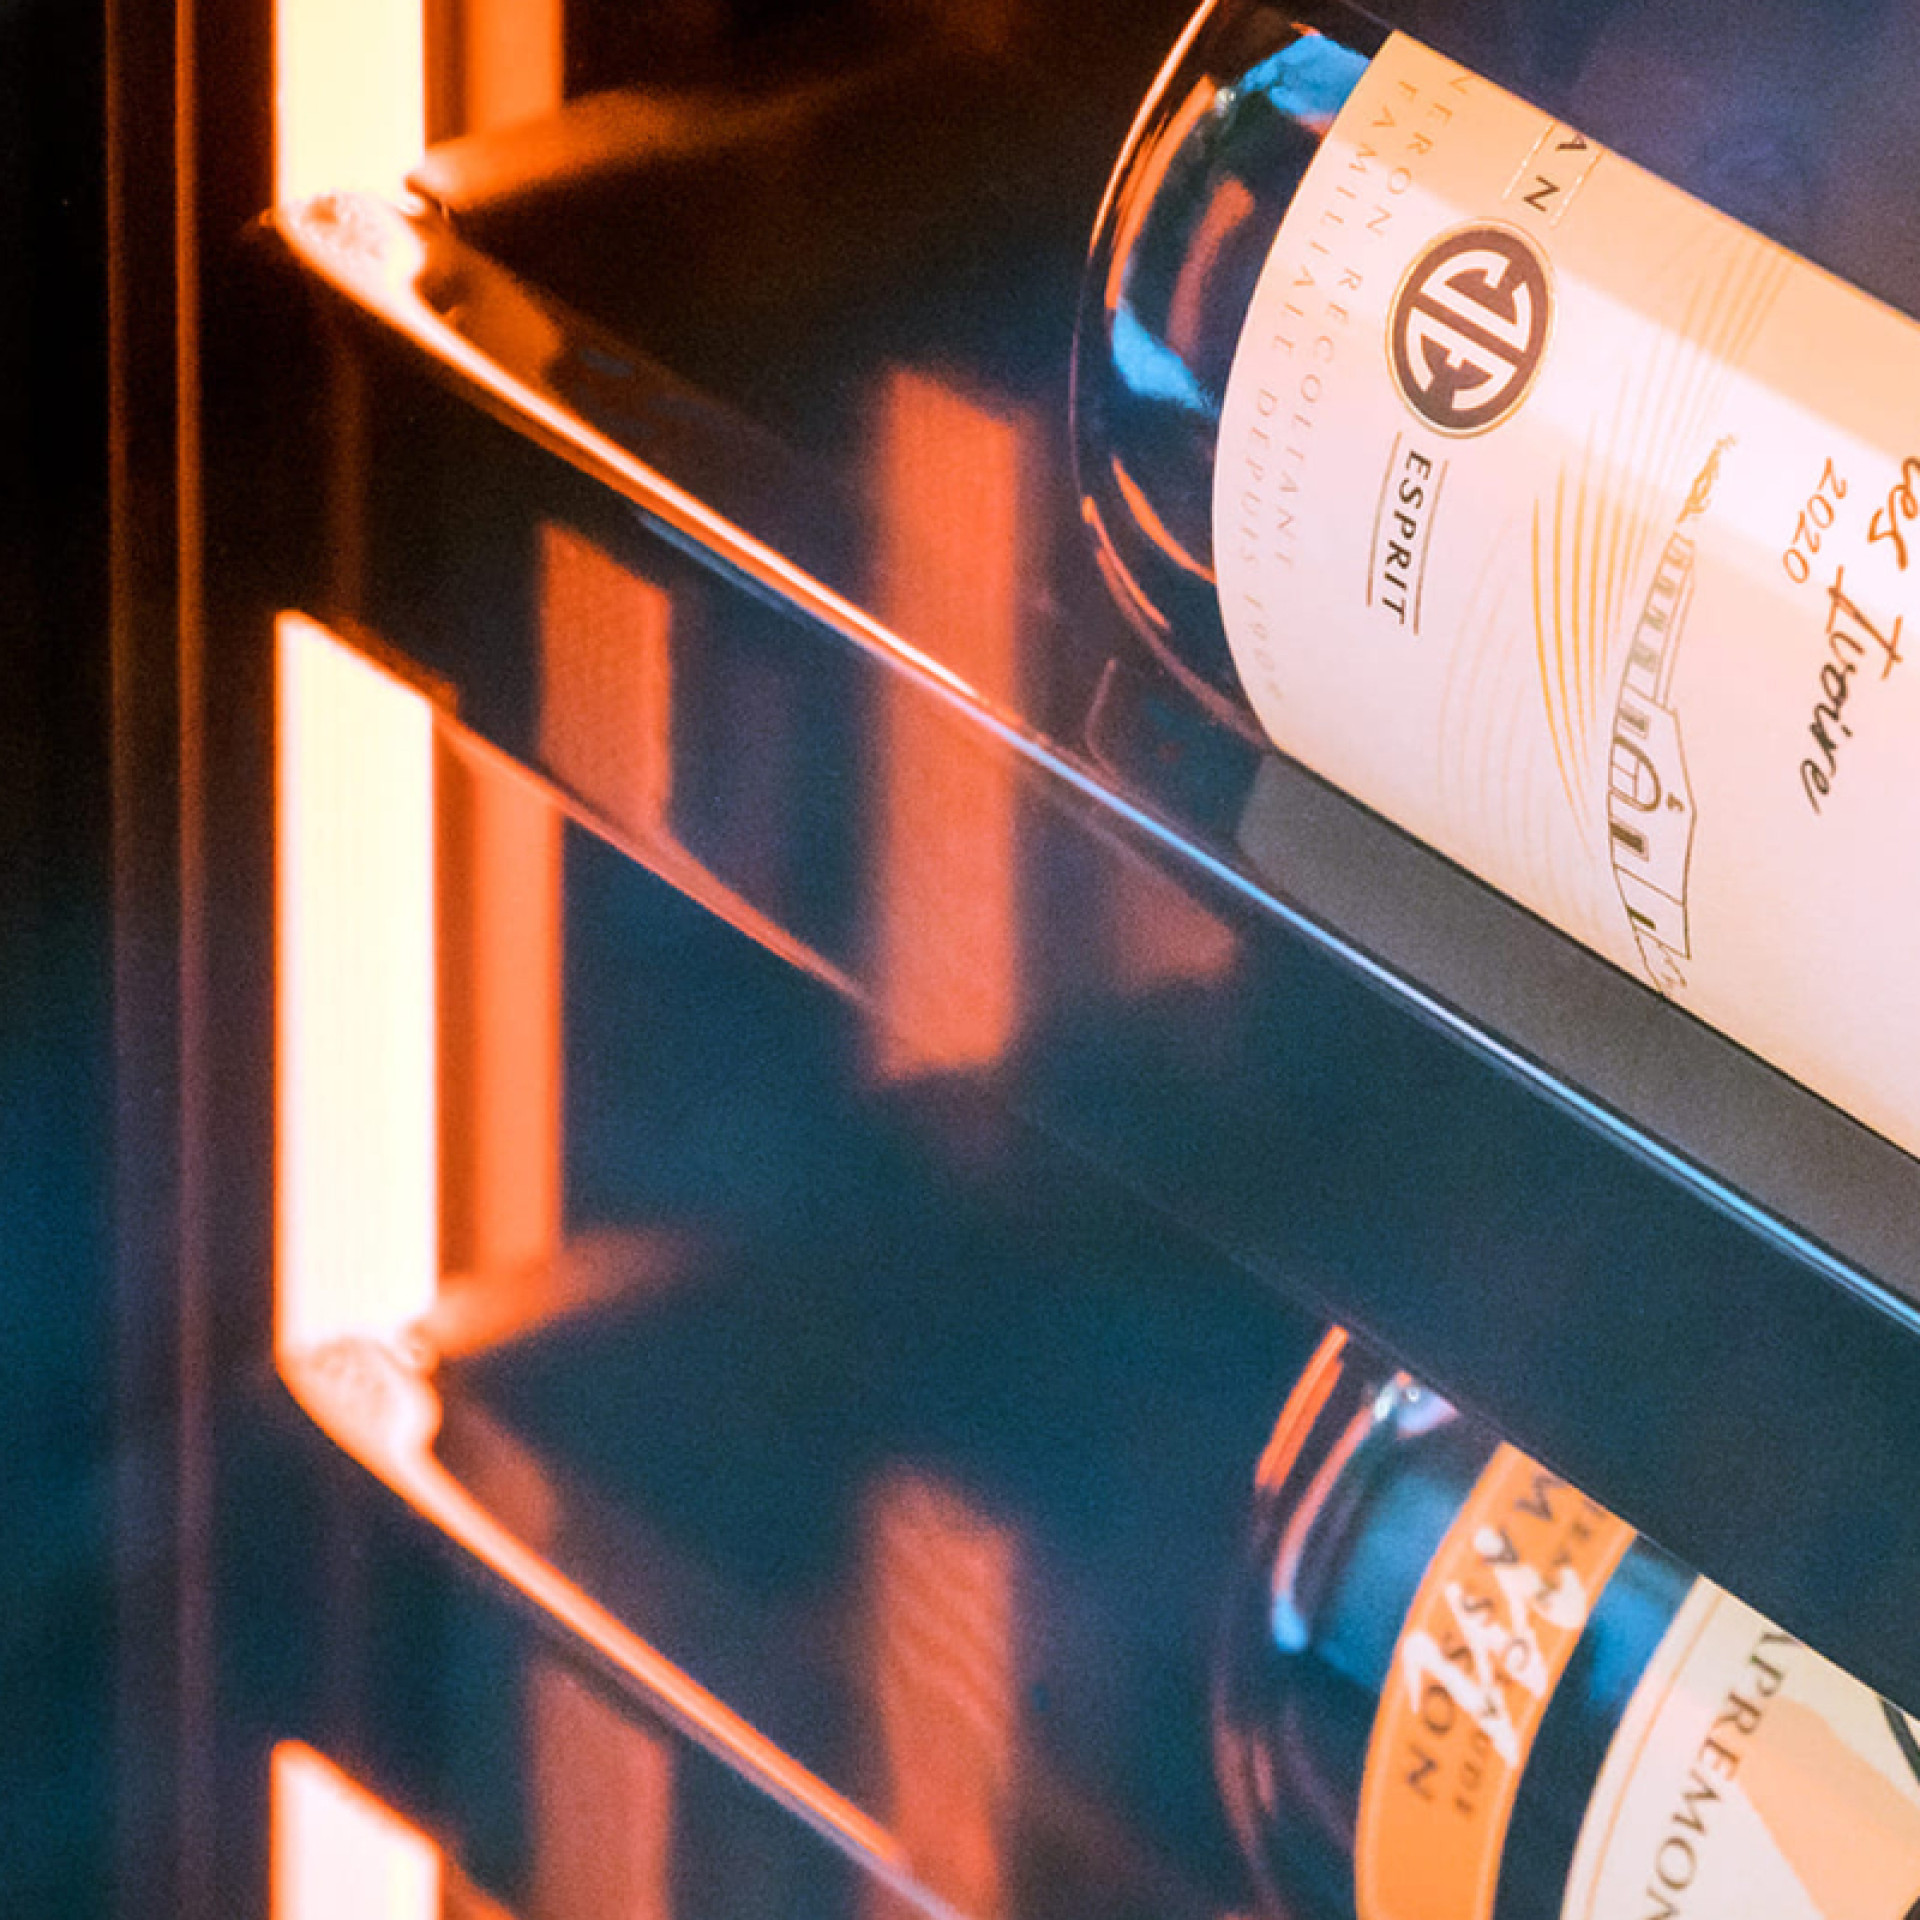 The luminous halo that runs through the entire wine cooler attracts the eye with its beautiful highlighting of the wine bottles.